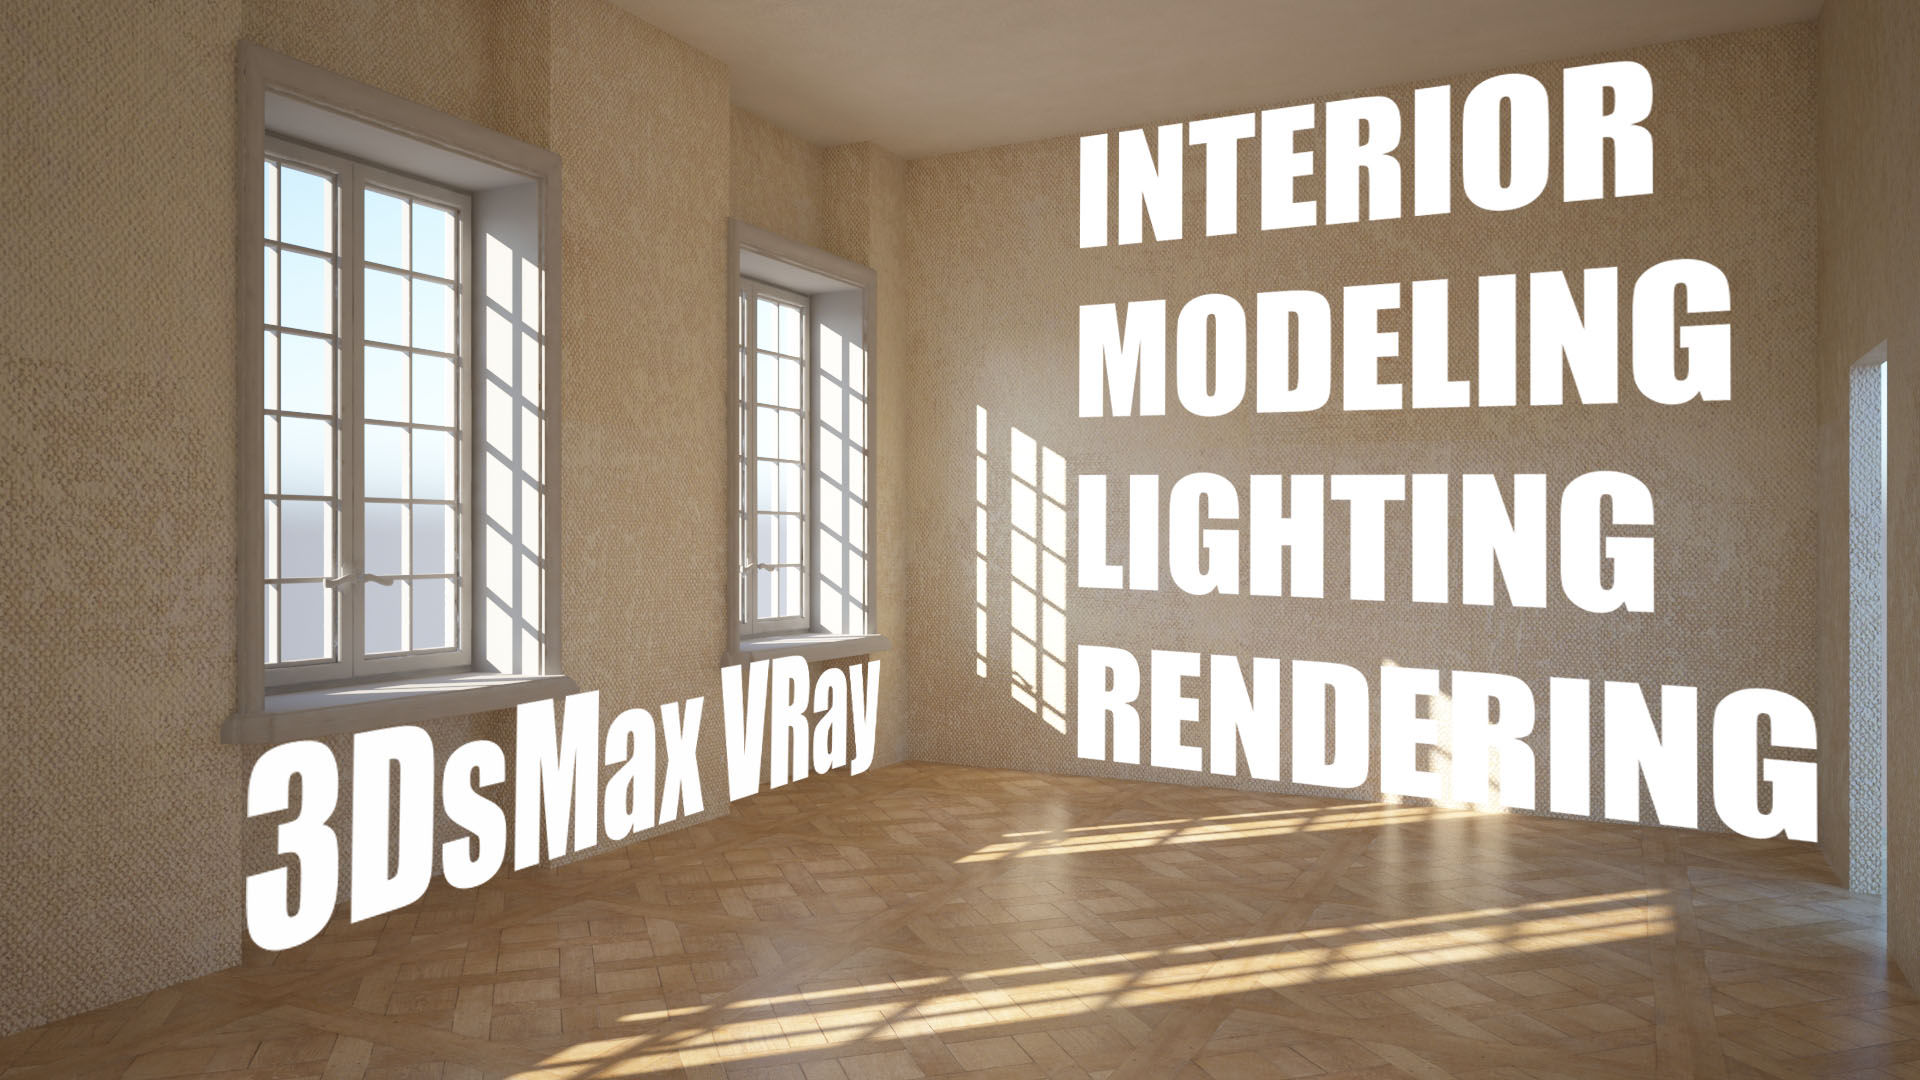 The Essential Guide To Lighting Interiors